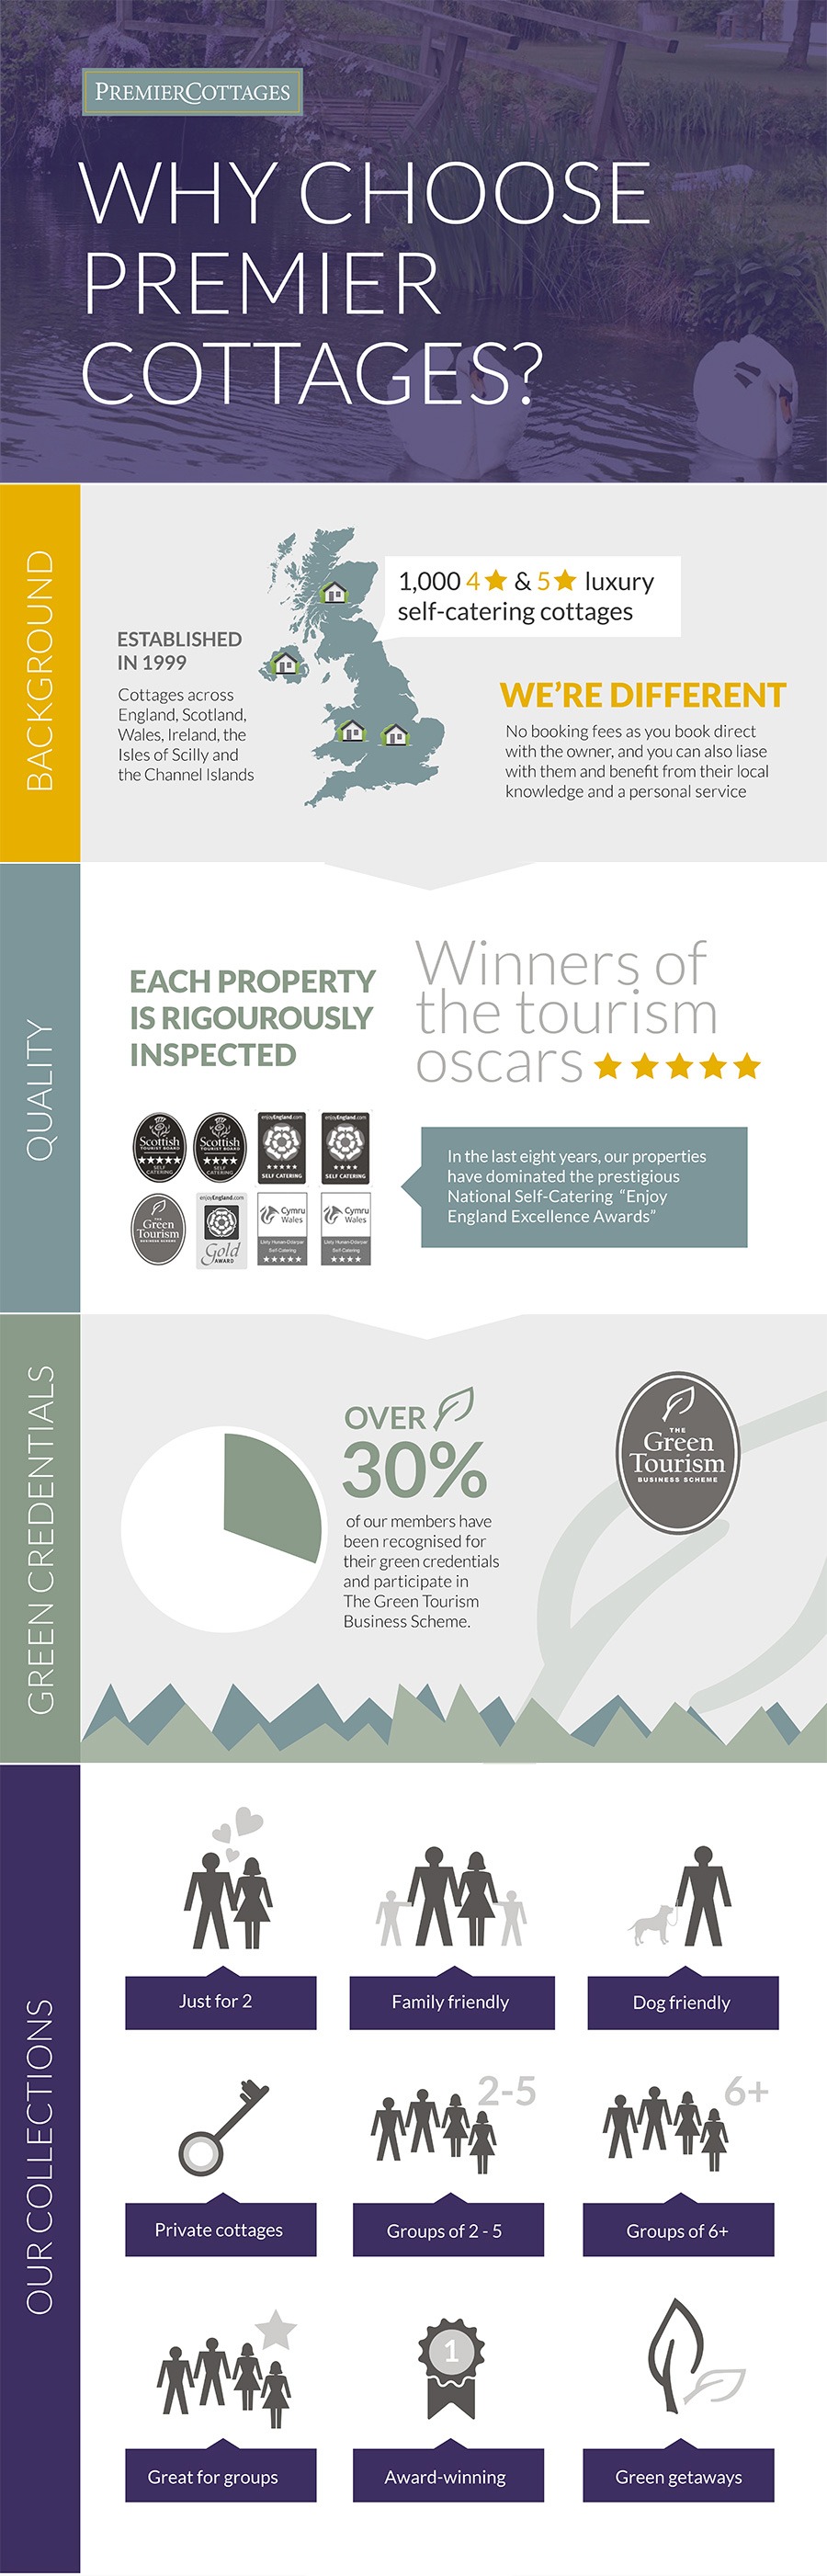 Leaflet on the reasons Why choose Premier Cottages